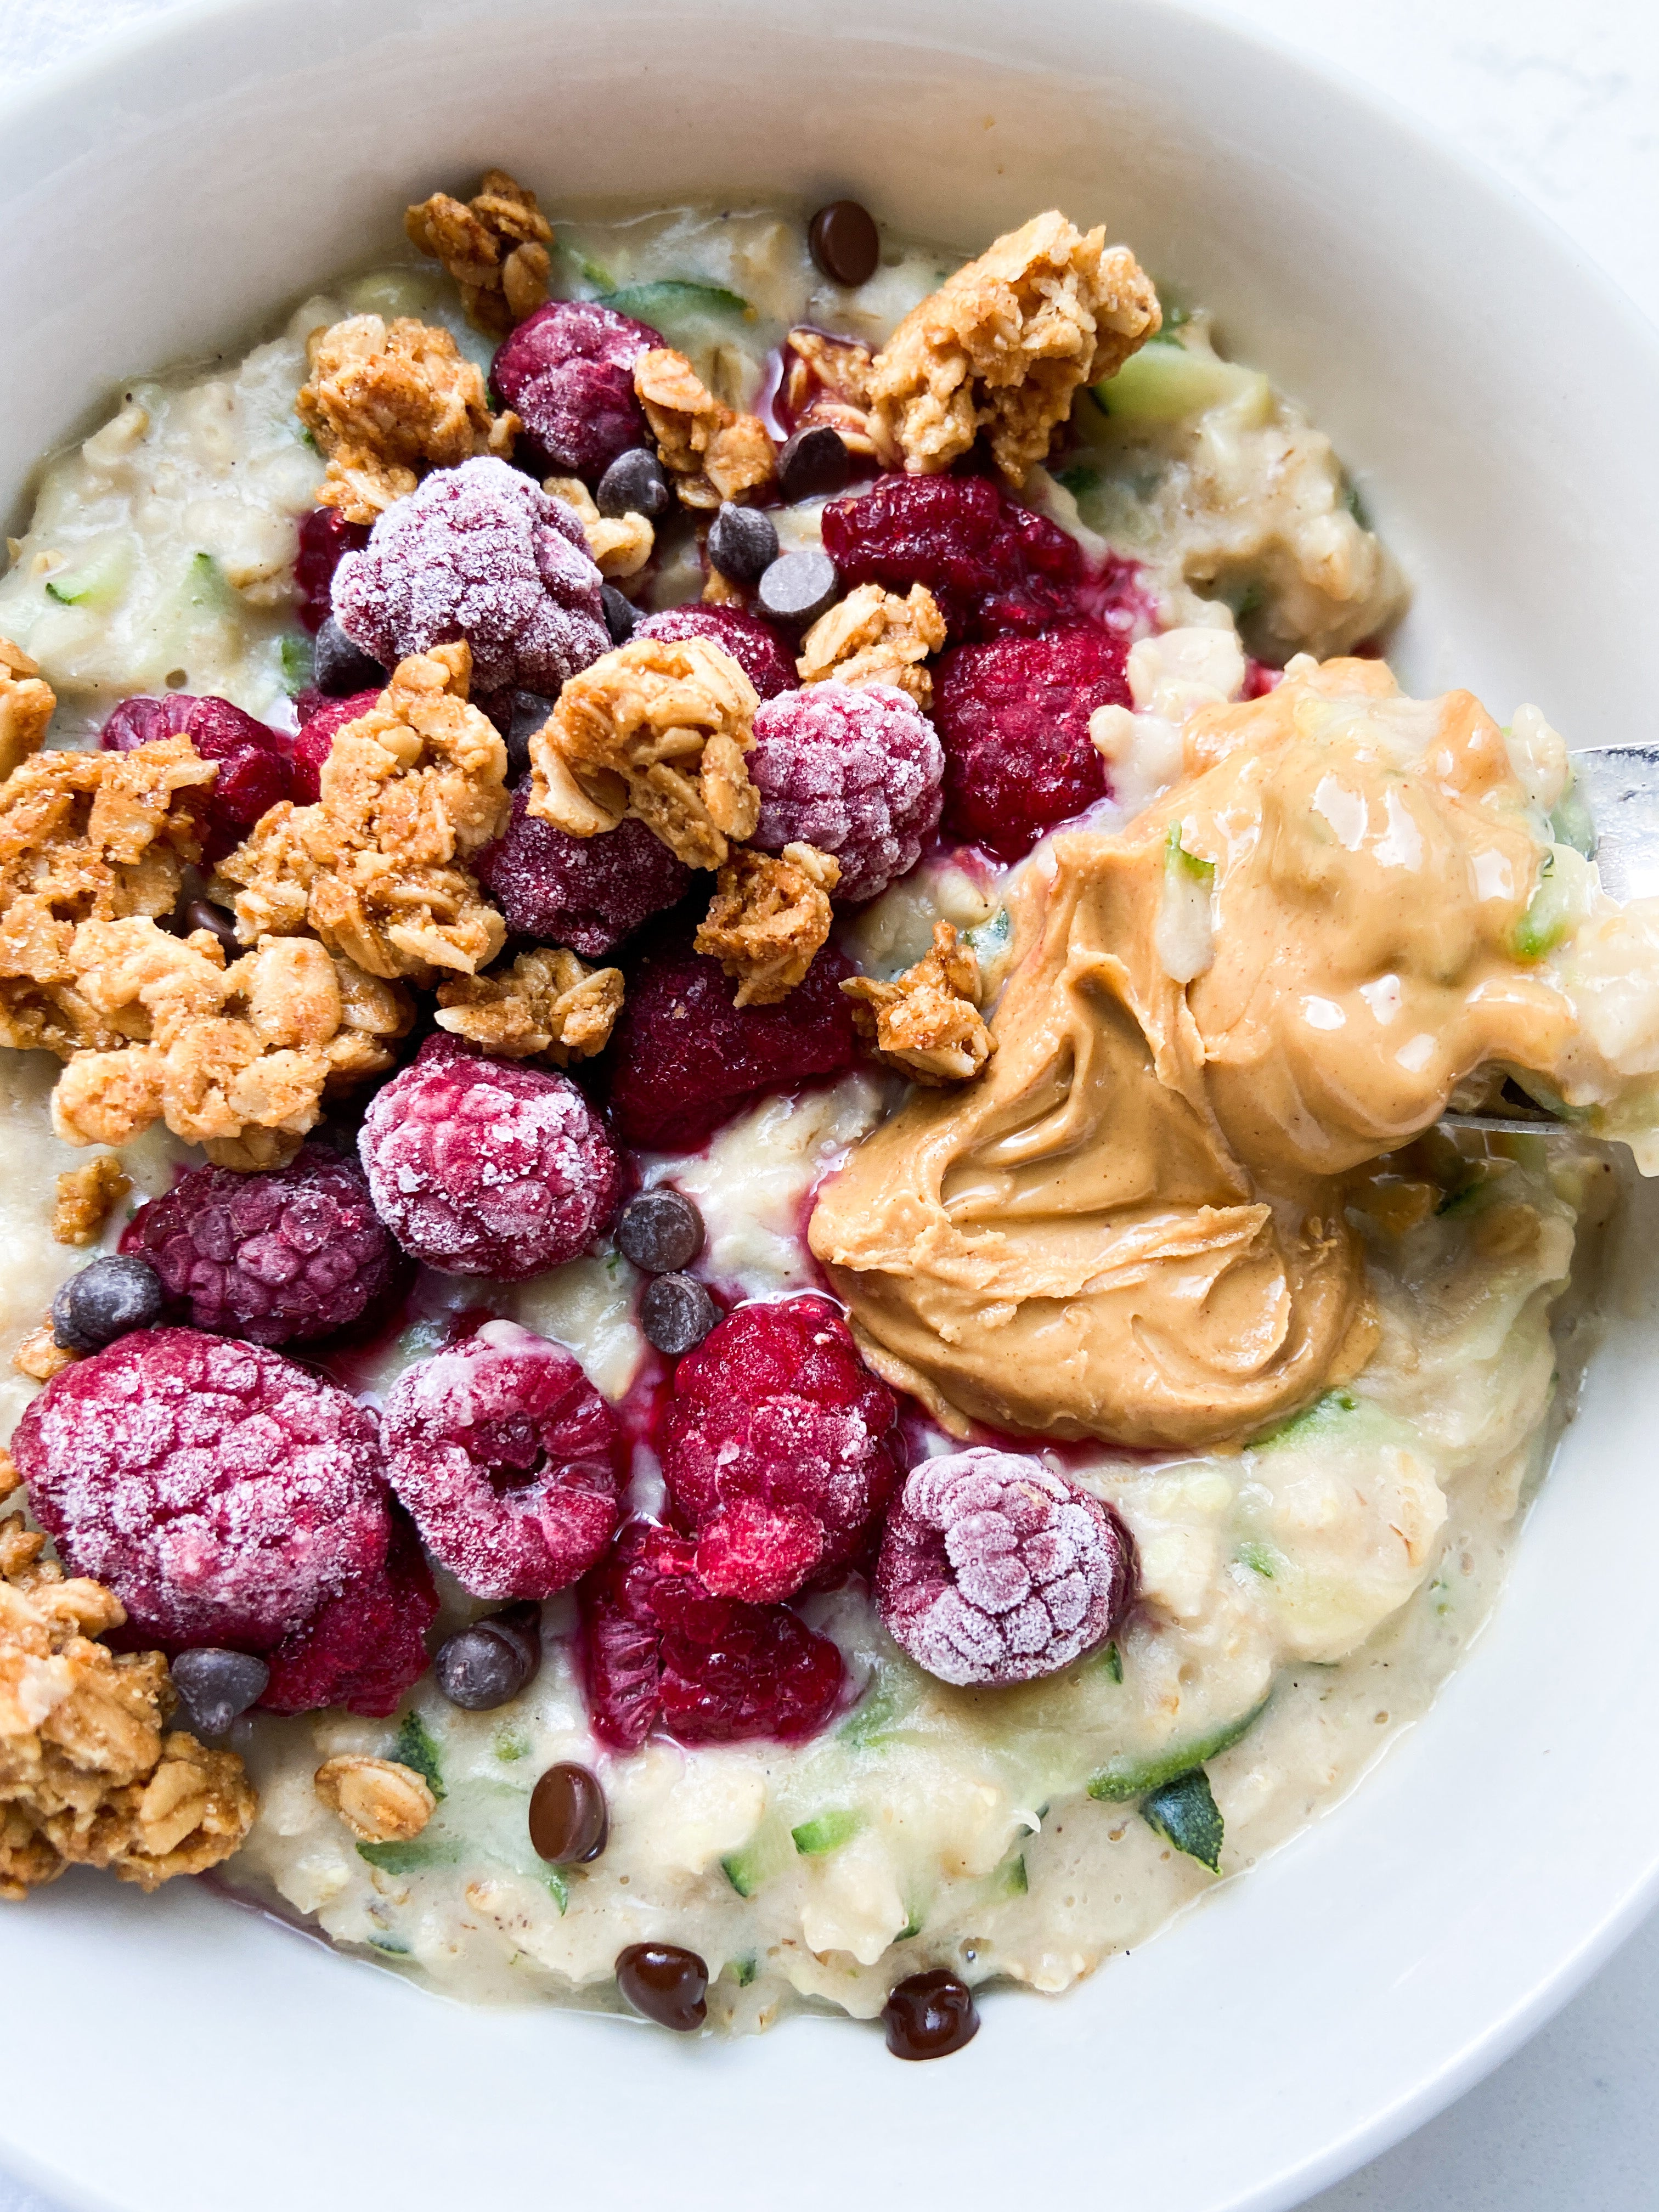 6 Protein Oats Recipes to Add to Your Meal Prep